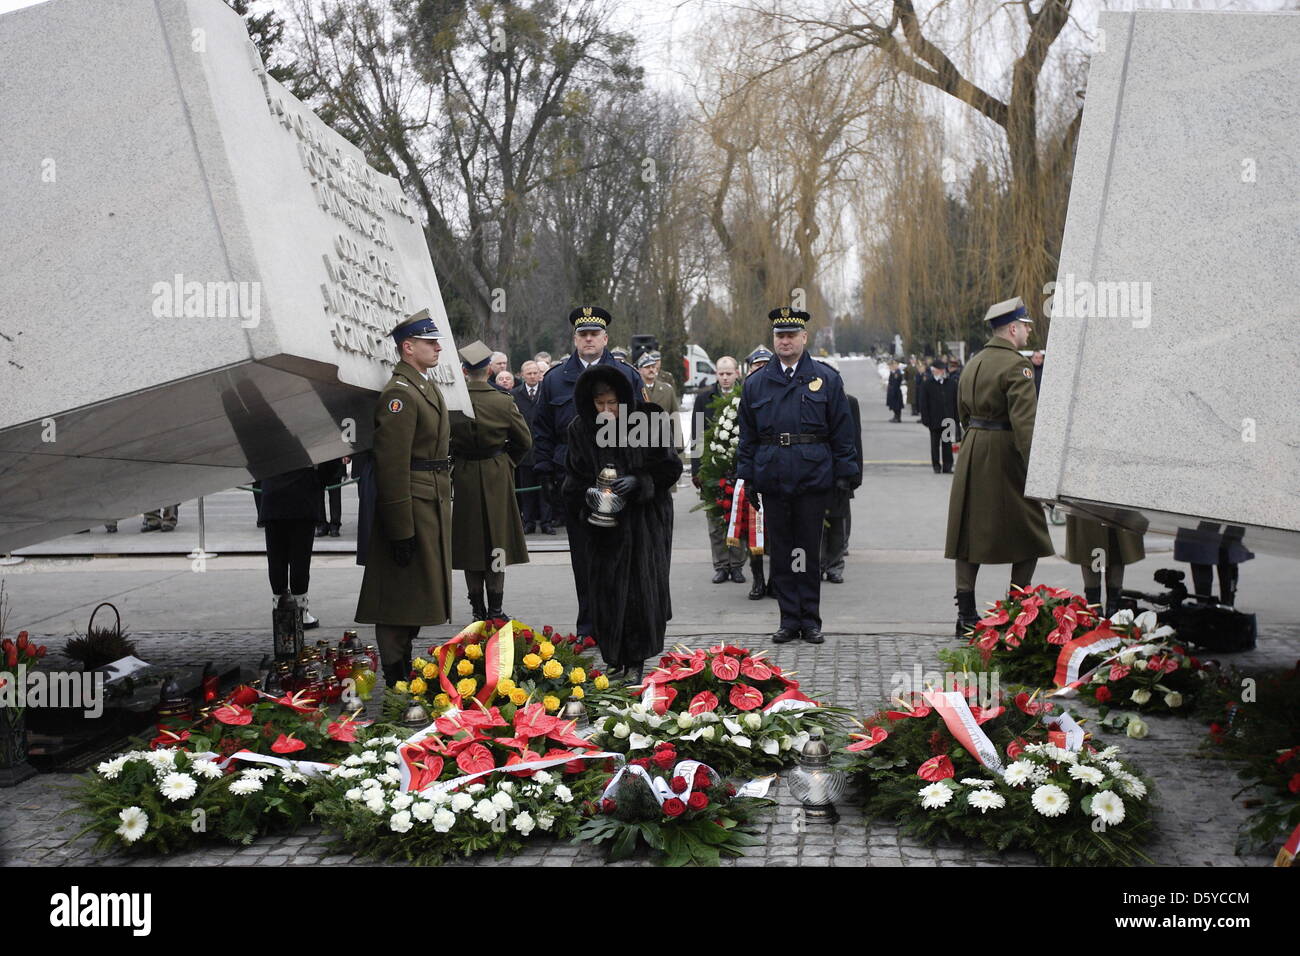 Warsaw, Poland. 10th April 2013. 3rd anniversary of Polish presidental plane crash in Smolensk, Russia in 2010. Government and Parliament members and families lays flowers under the Victims of The Presidental Plane Catastrophe monument in Warsaw at Powazki cemetery. Hanna Gronkiewicz - Waltz Mayor of Warsaw takes part in the ceremony Credit: Michal Fludra / Alamy Live NewsCredit: Michal Fludra /Alamy Live News Stock Photo